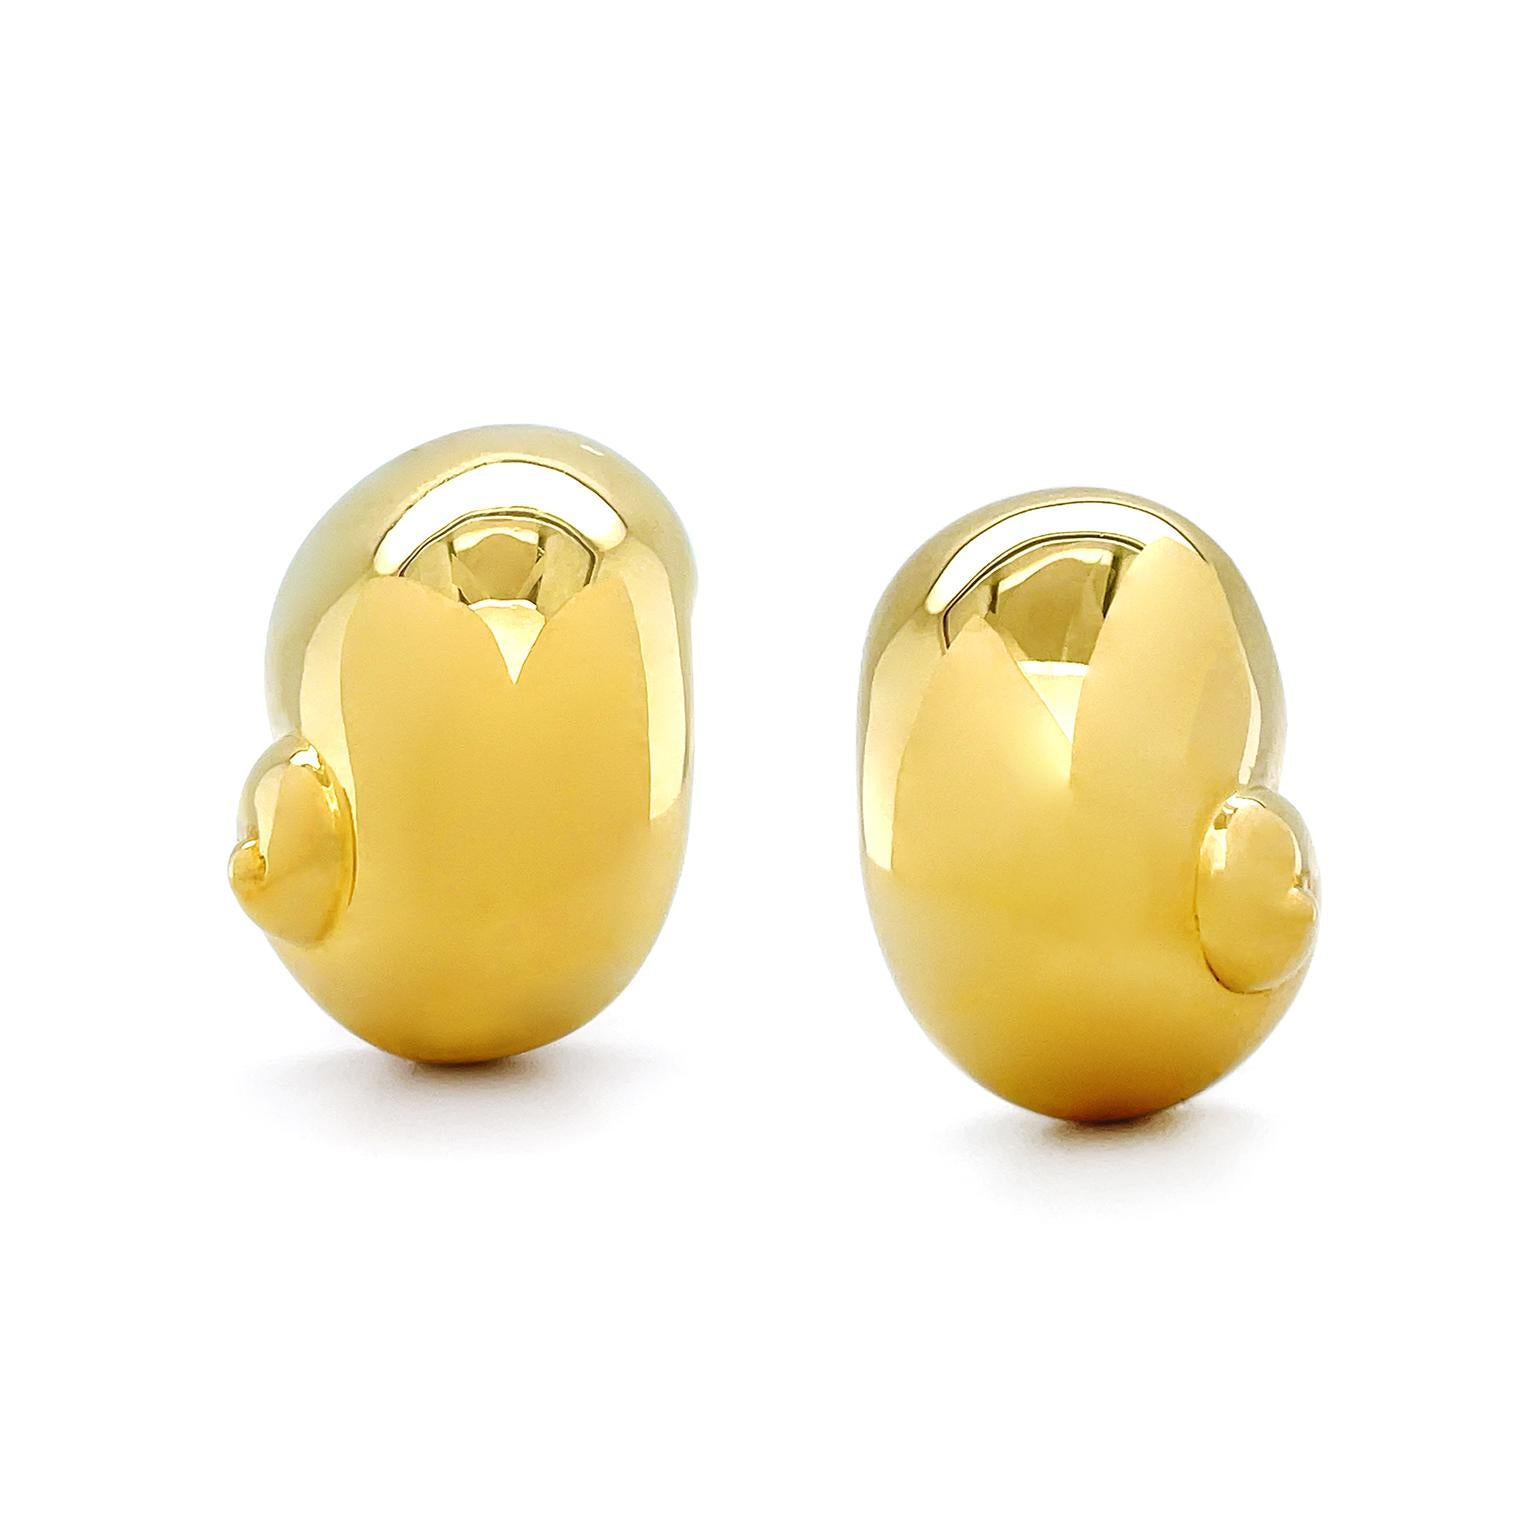 Inspired by the outline of the oceanic animal, Nautilus, these earrings feature distinct curves. 18k yellow gold sweeps upward before winding into a small curl. The polished metal allows for a warm luminosity to emit in every direction. Clip-backs